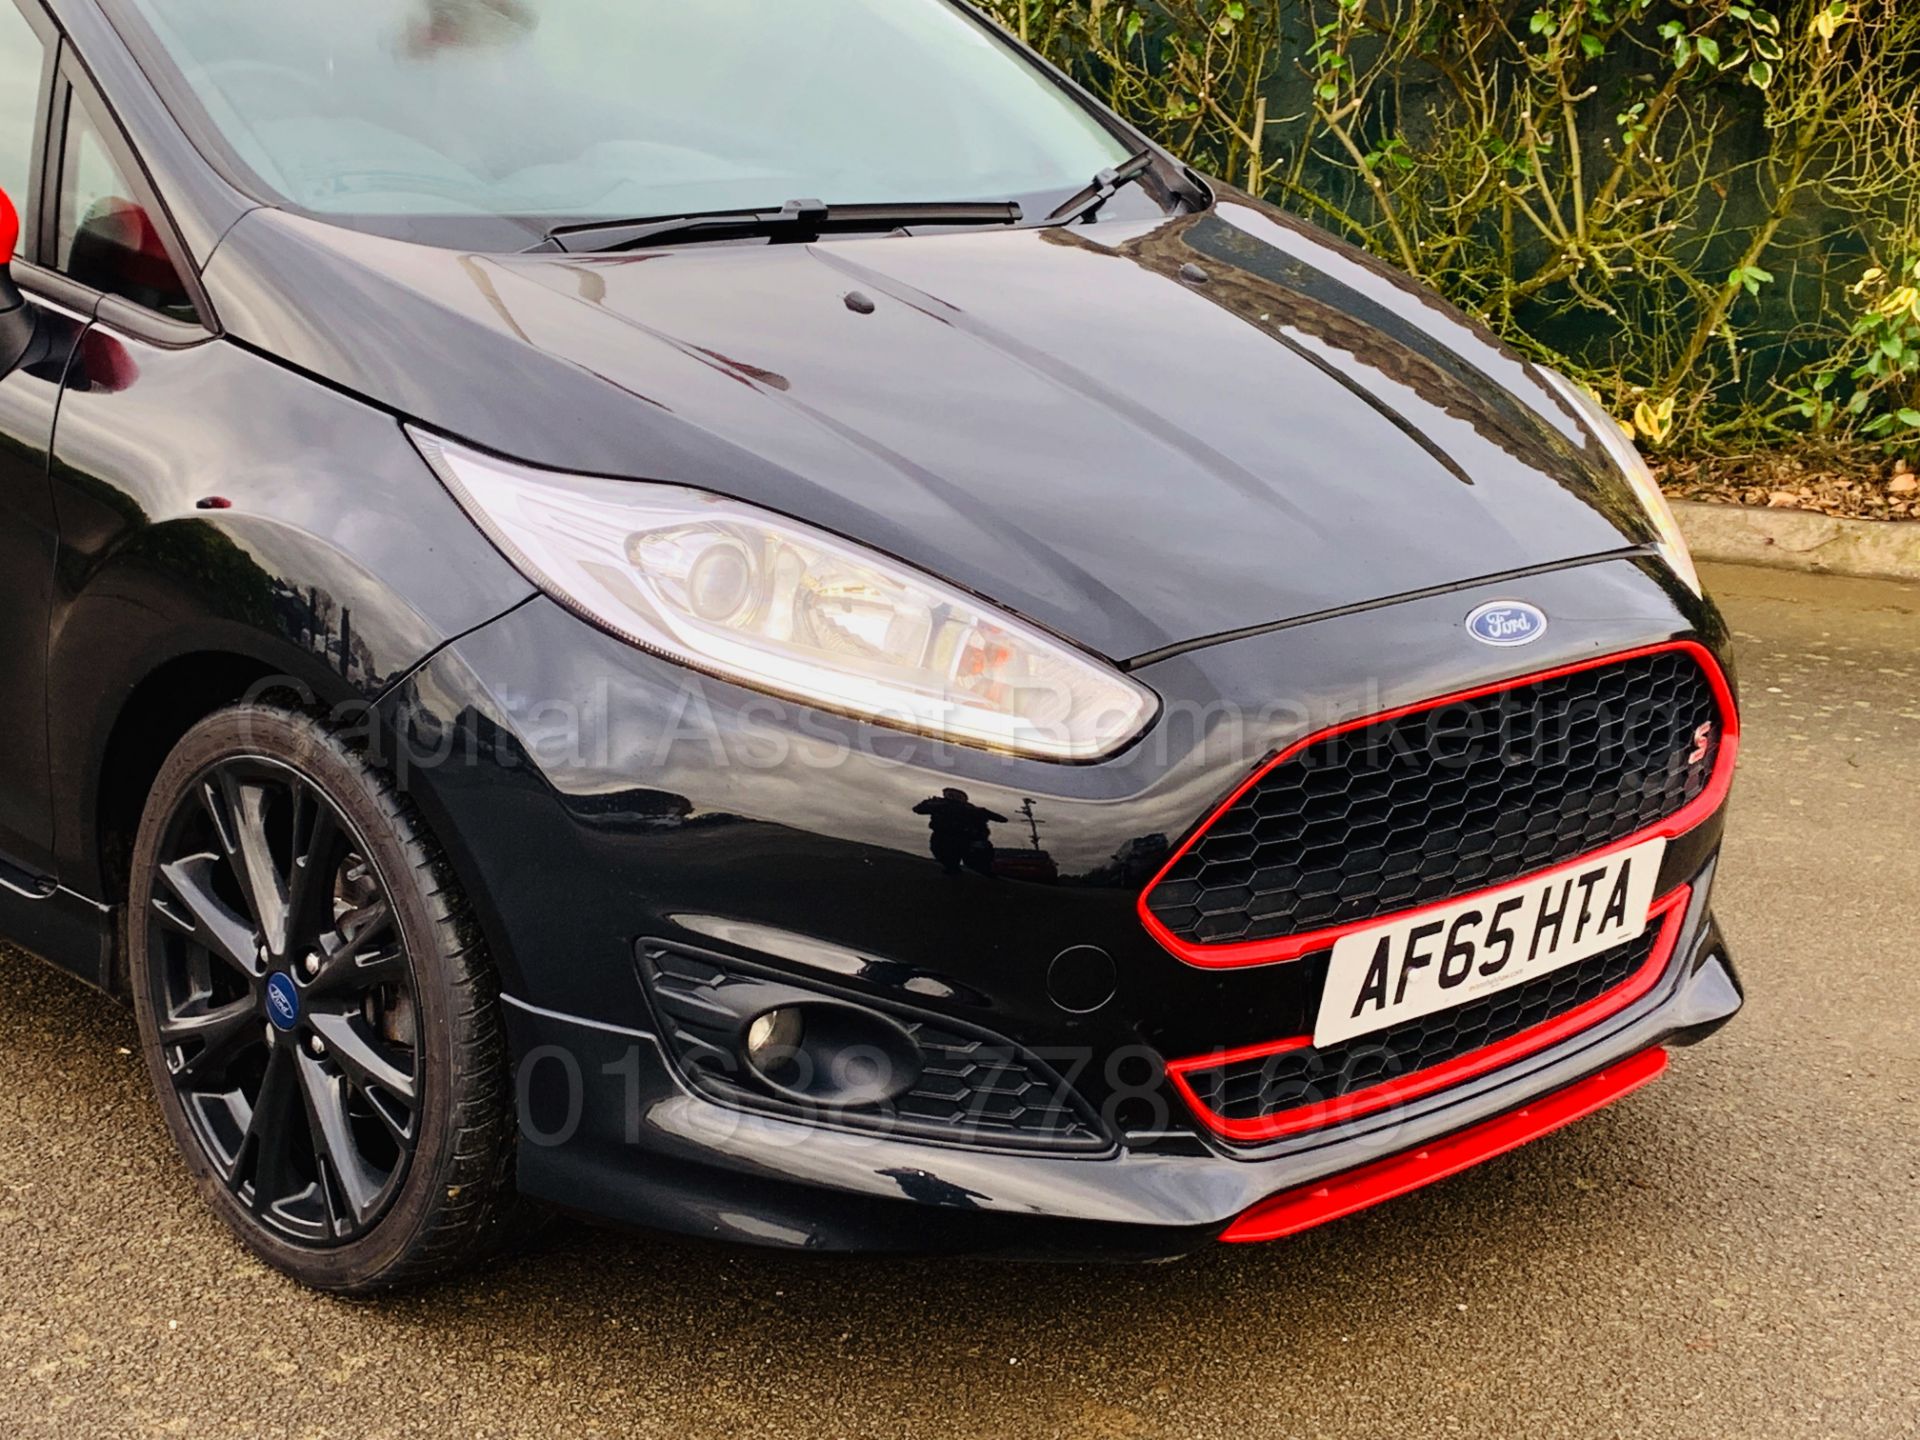 (On Sale) FORD FIESTA *ZETEC S - BLACK EDITION* (2016 MODEL) '1.0L ECO-BOOST - 140 BHP' - Image 13 of 45